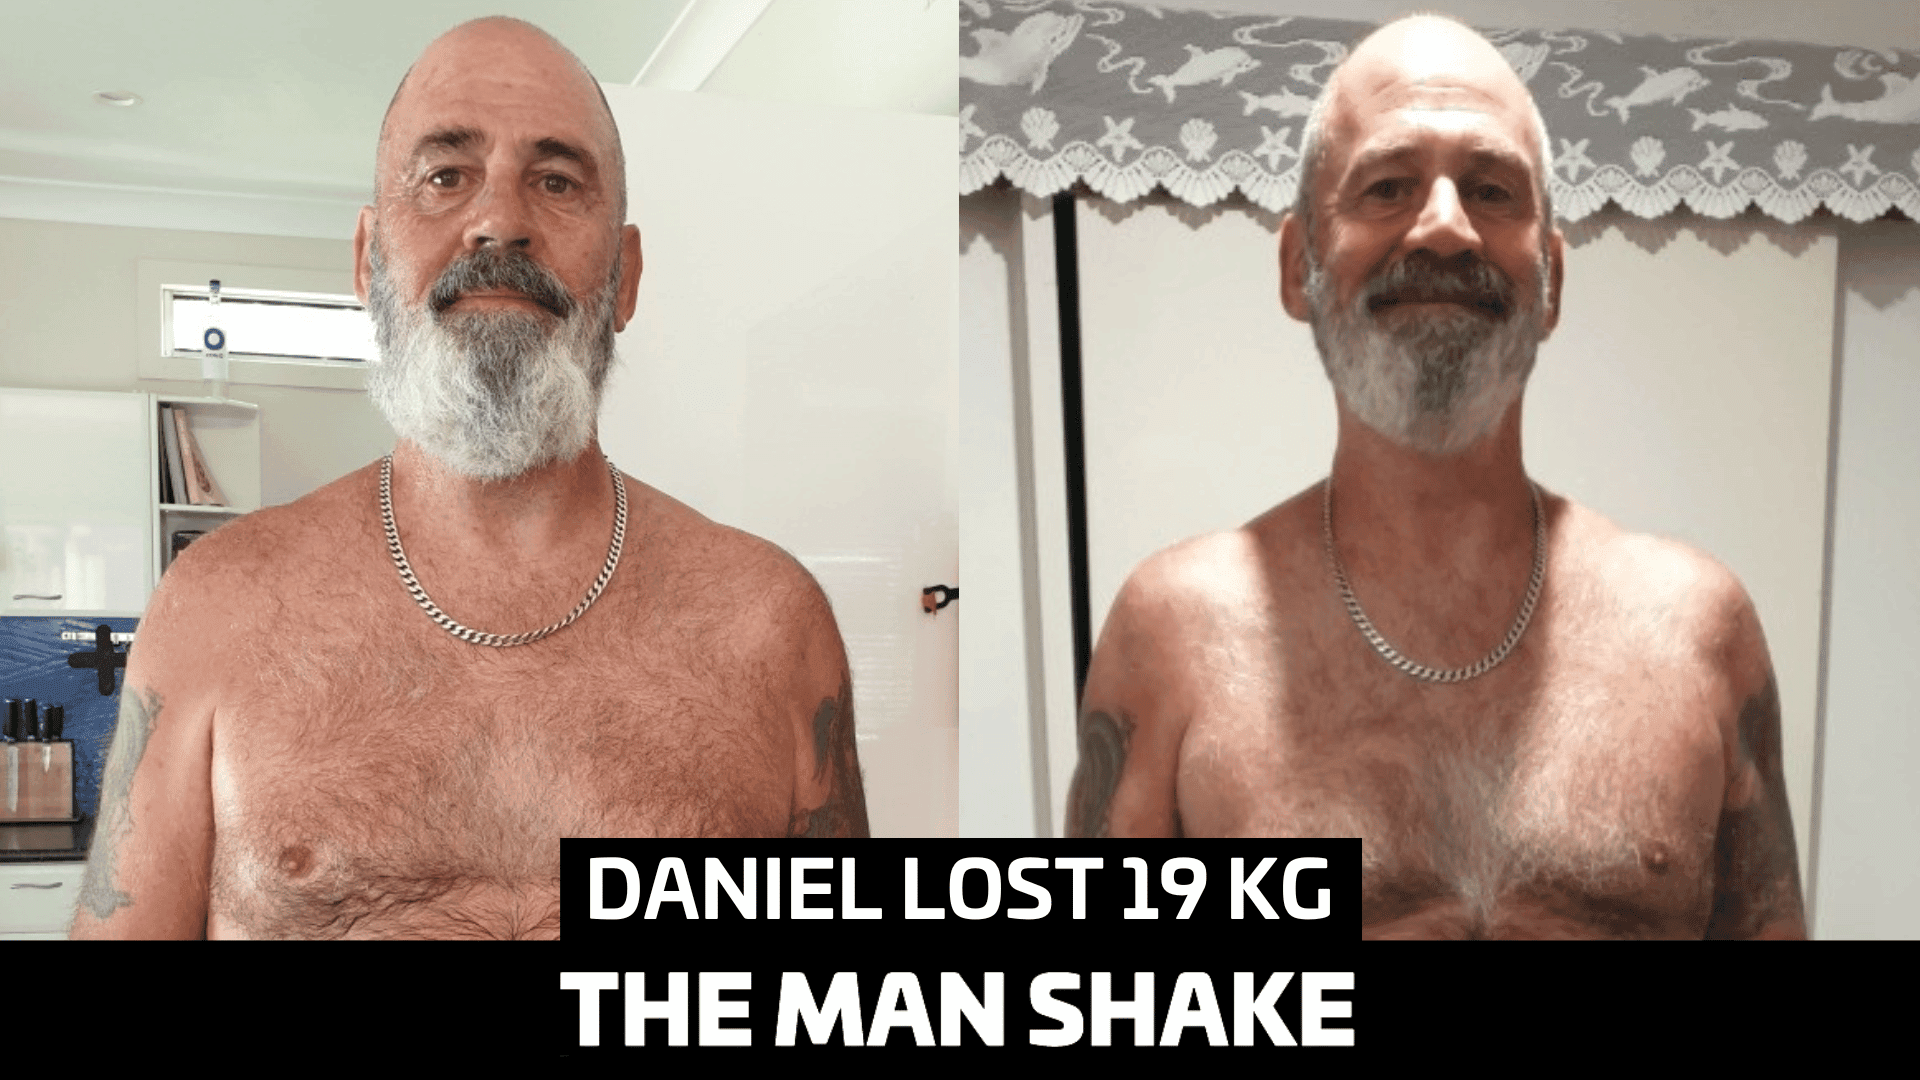 Daniel lost 19kgs after he had a realisation